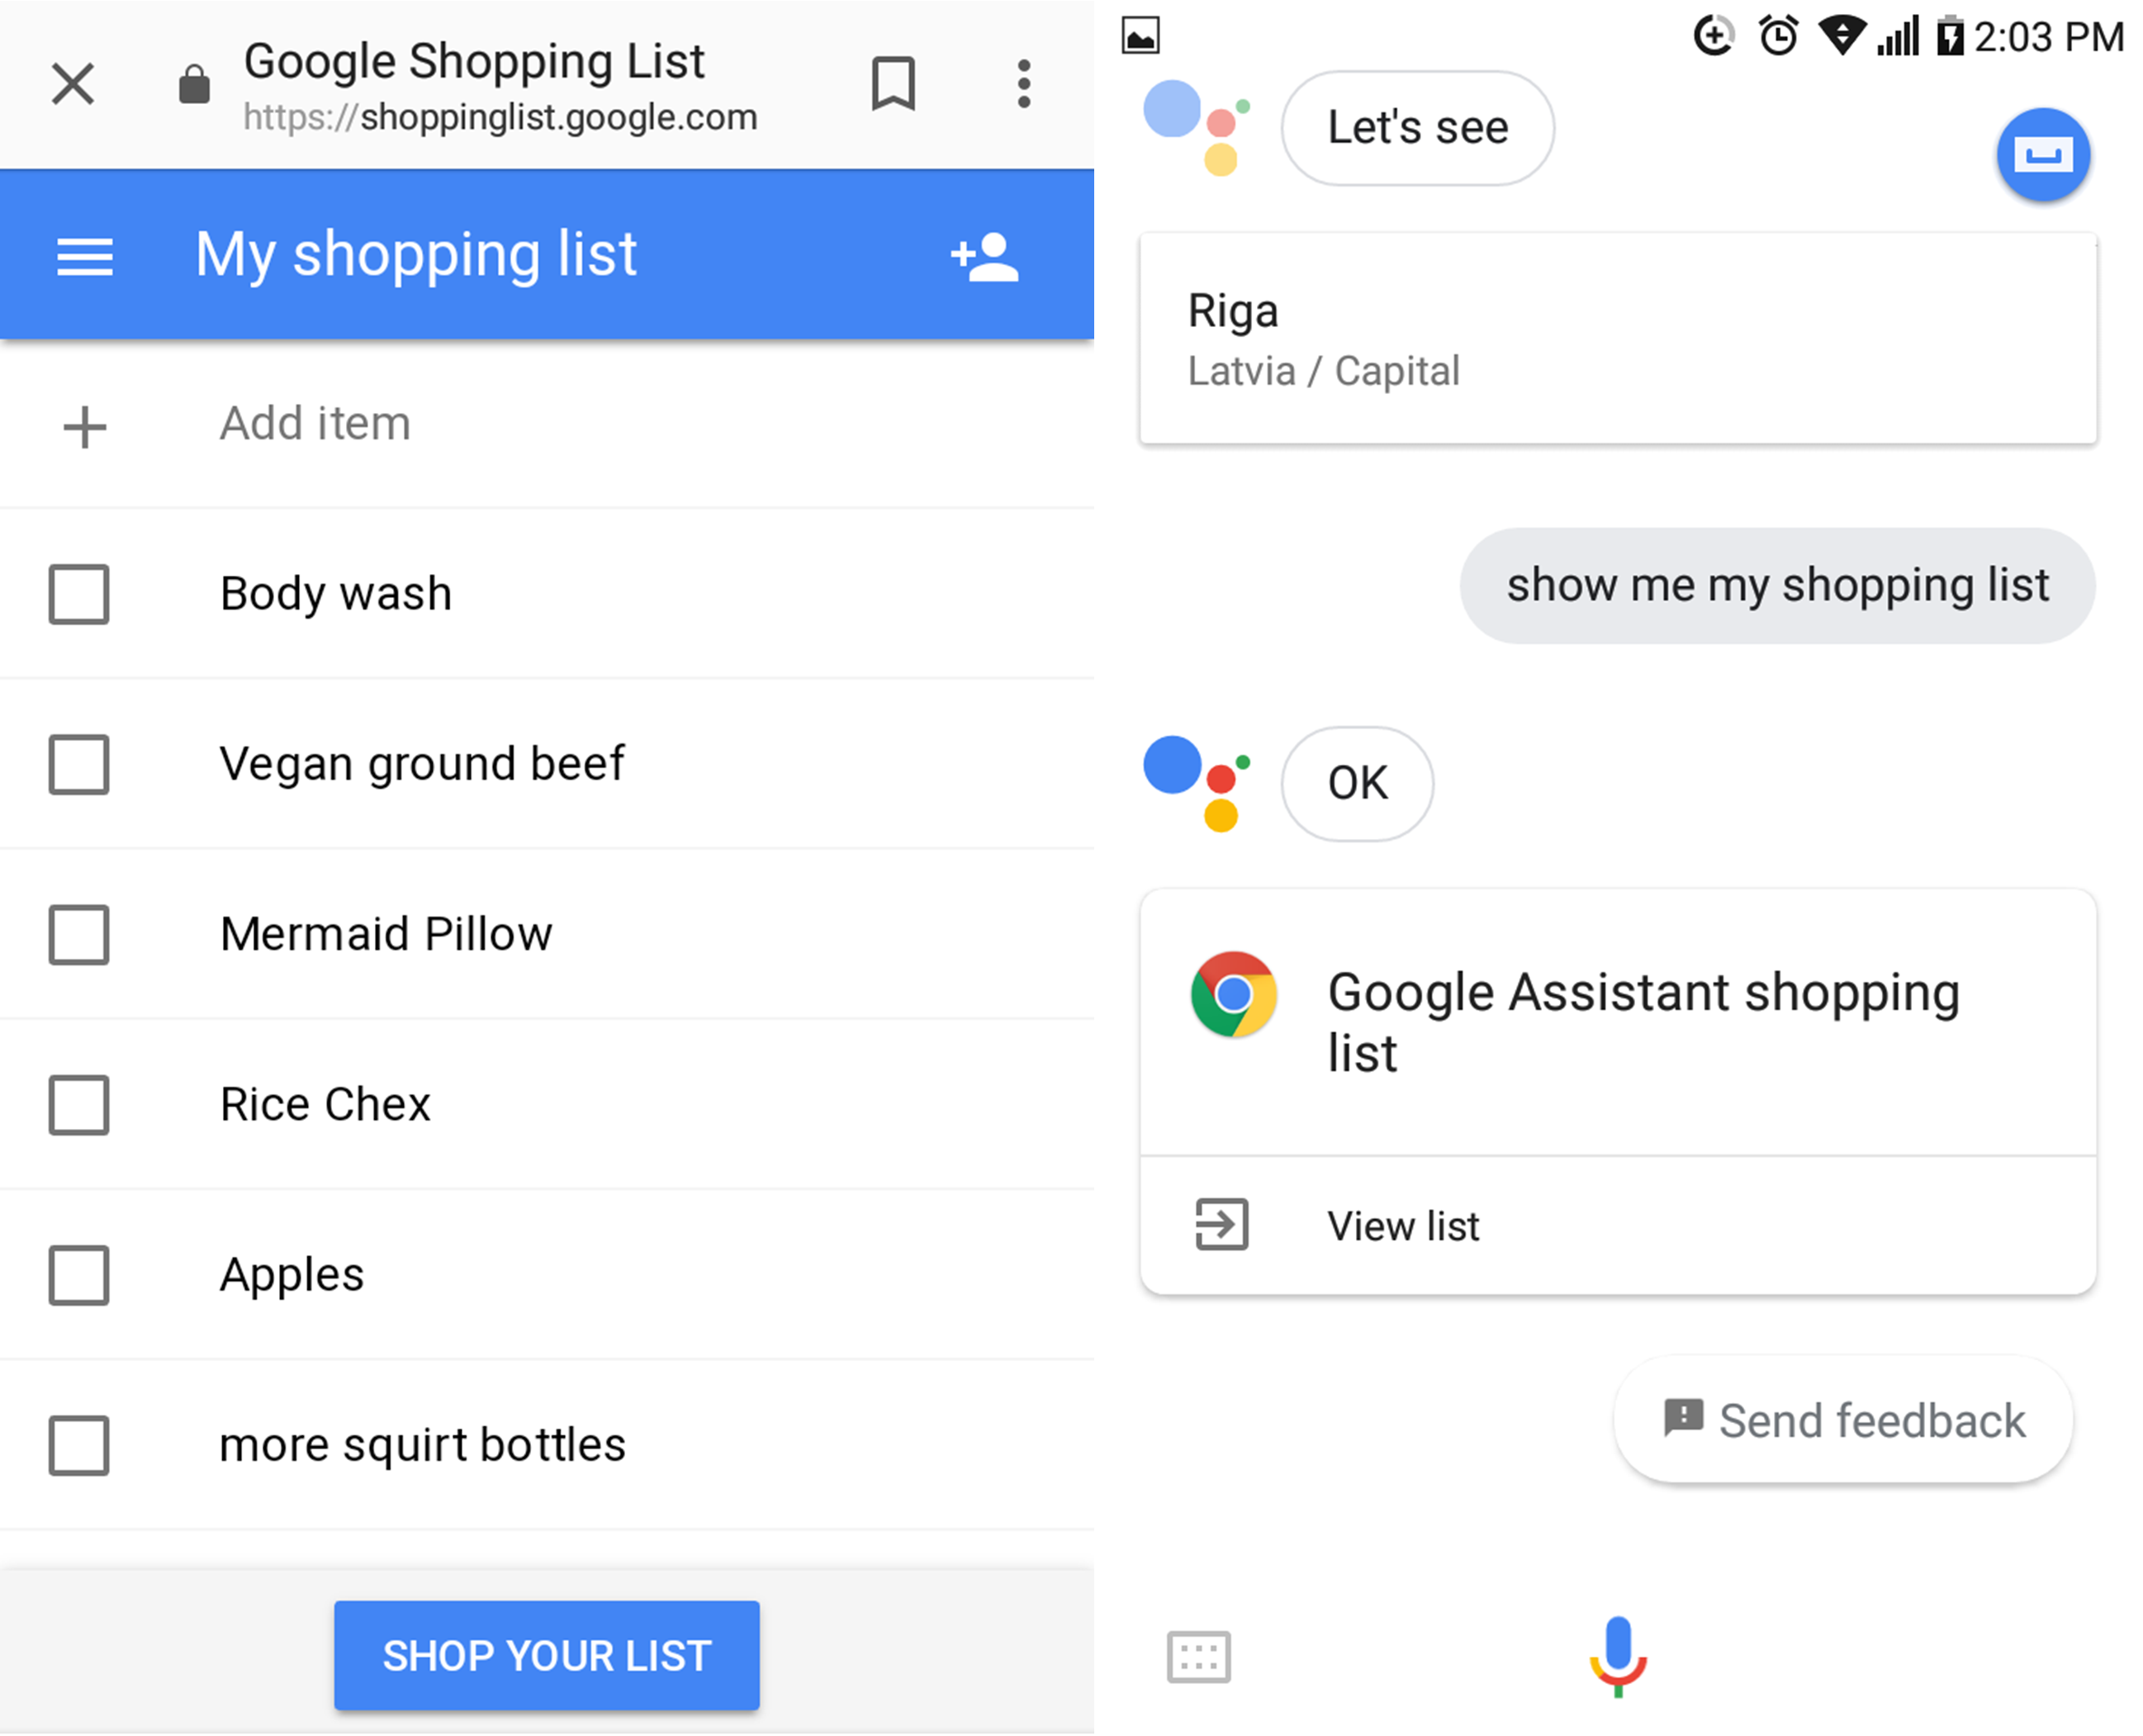 Image is a Google shopping check-list and a conversation with the Google Assistant asking it to show a shopping list